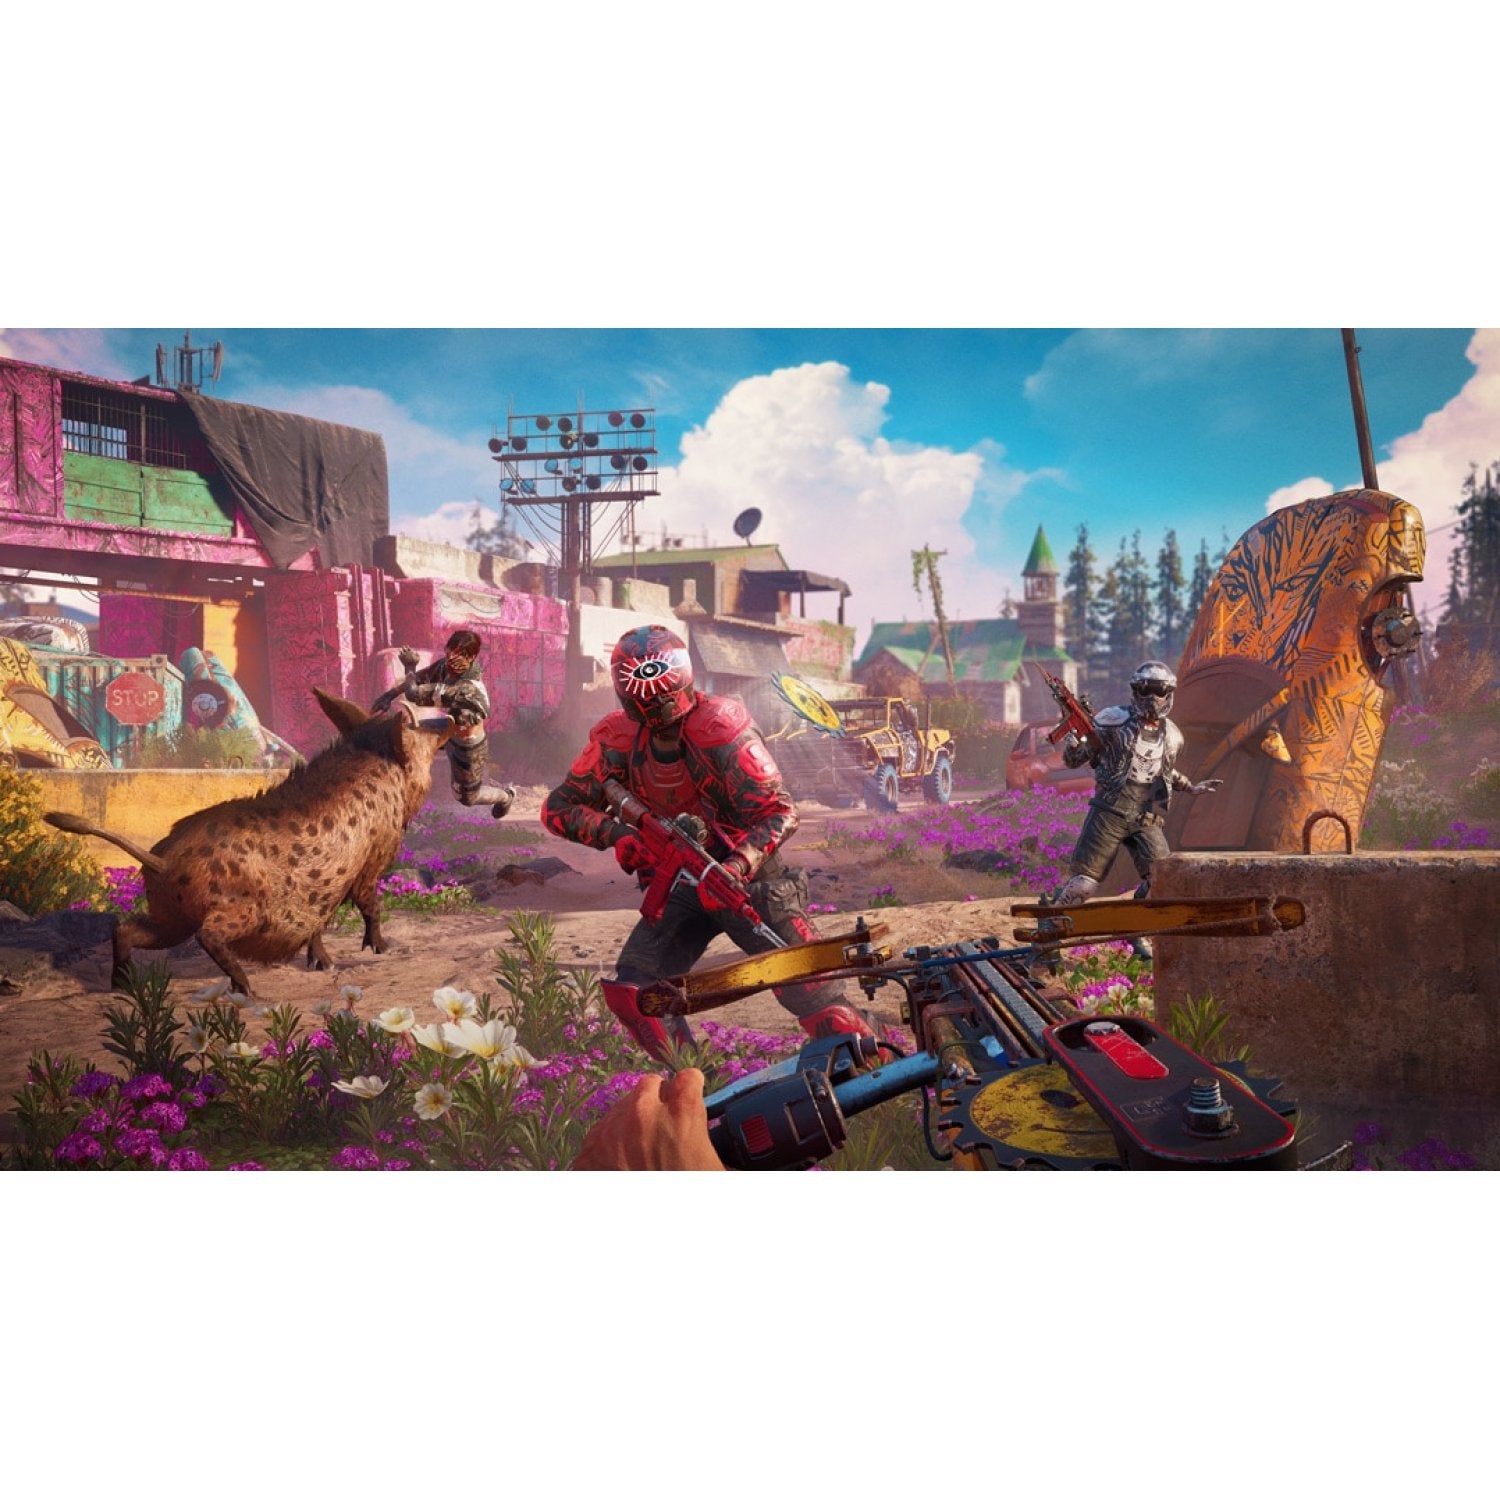 download ps4 far cry new dawn for free